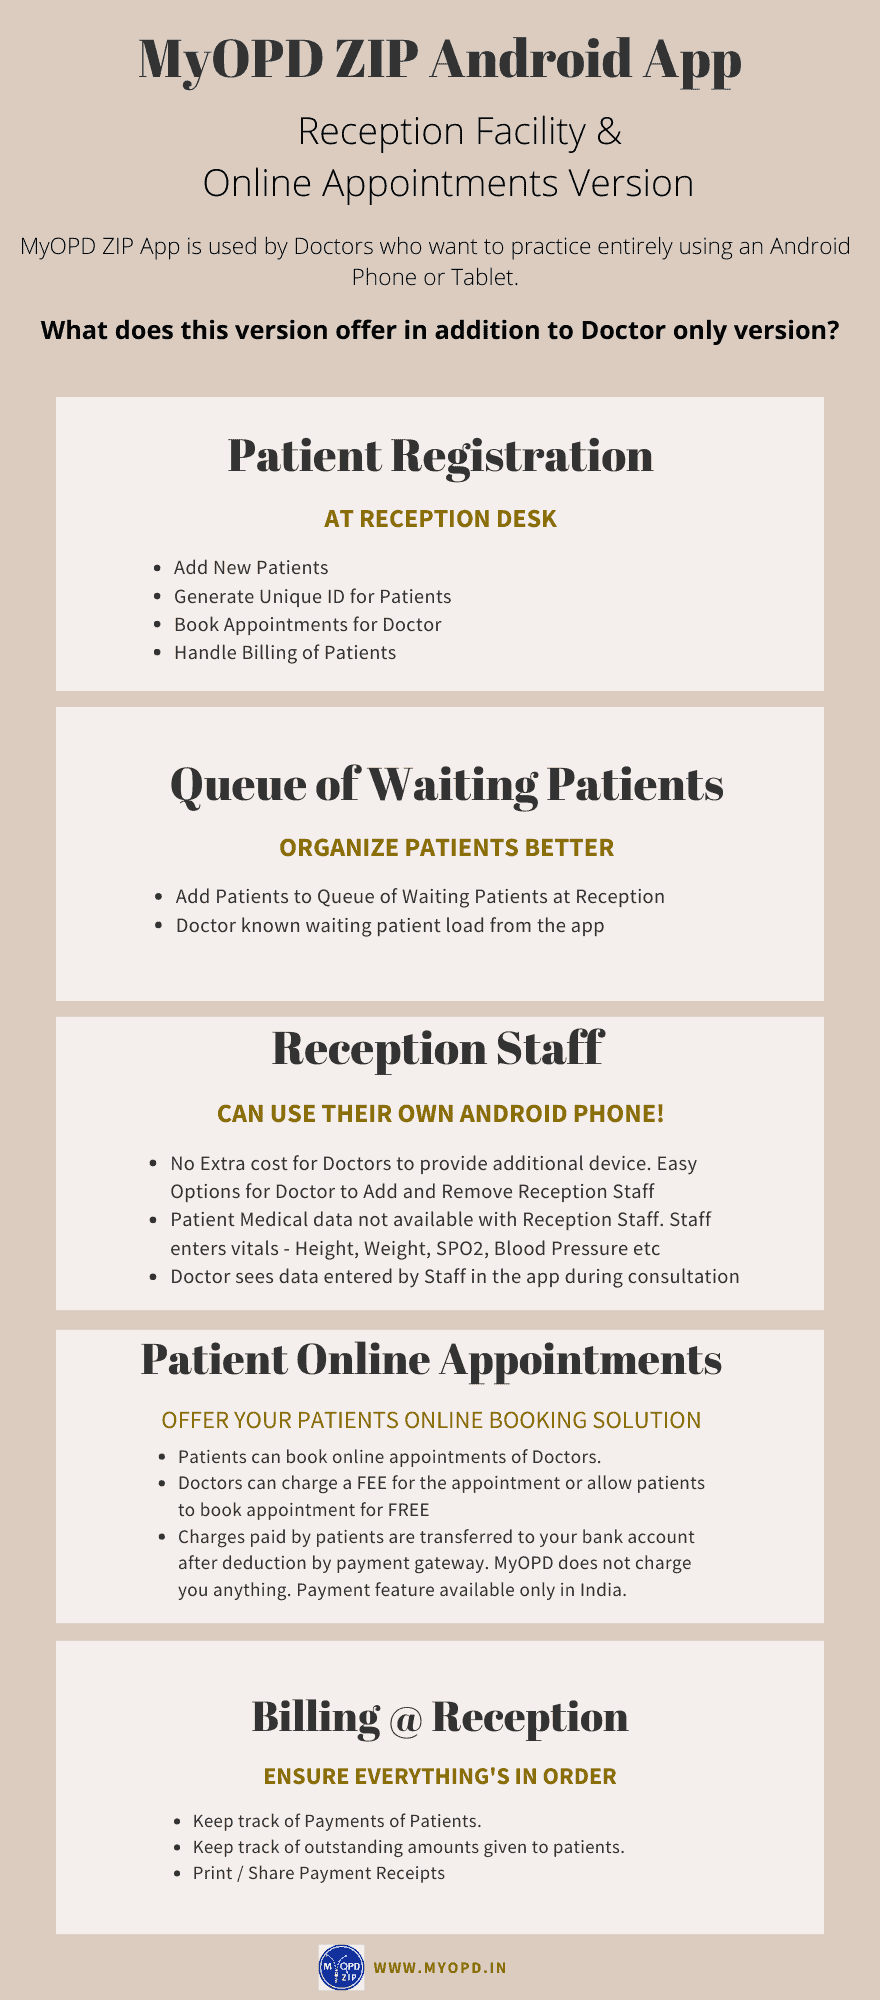 Online appointment booking solution